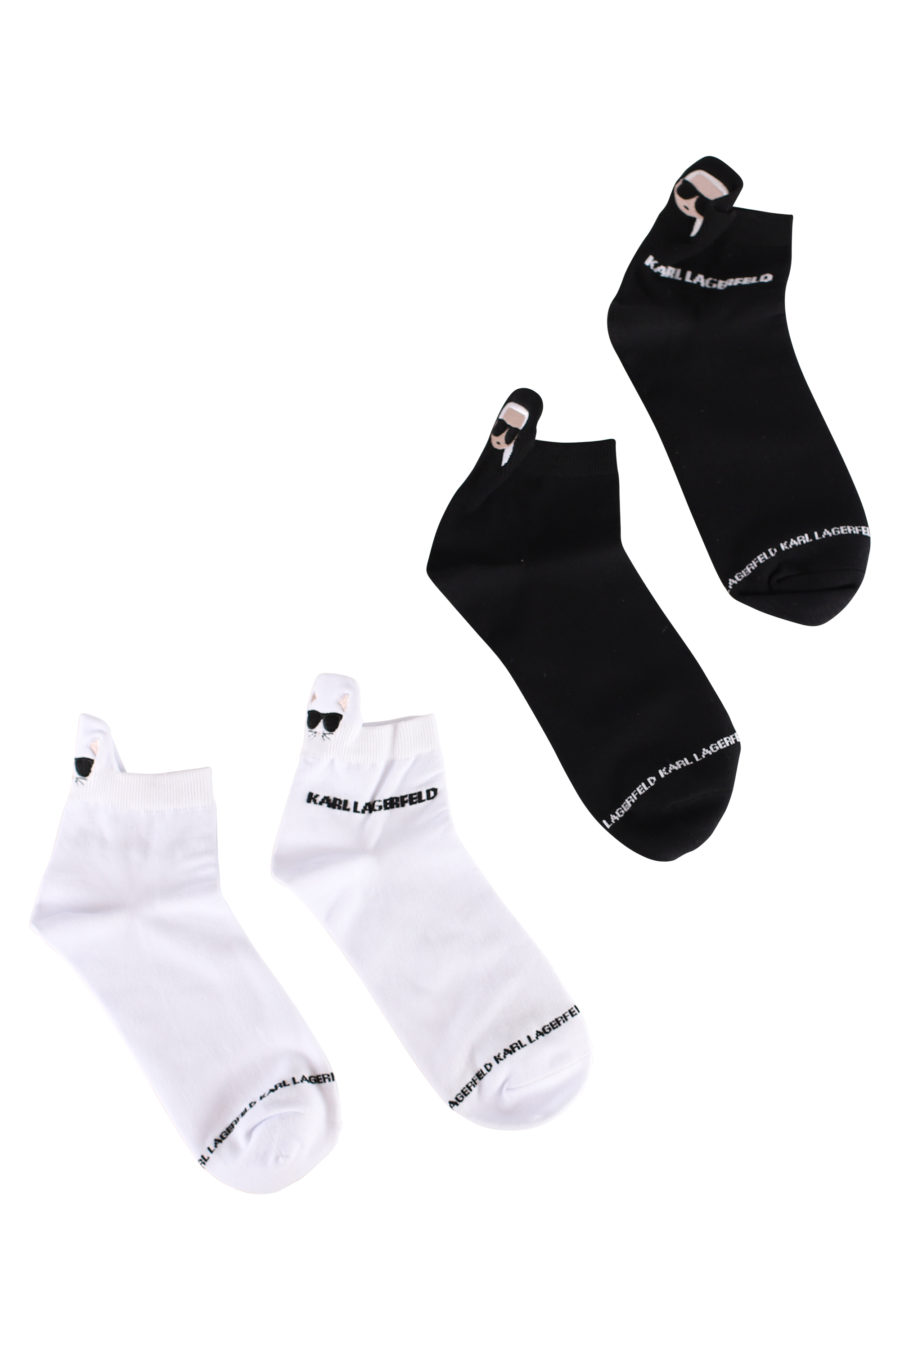 Pack of 2 embroidered socks - IMG 1867